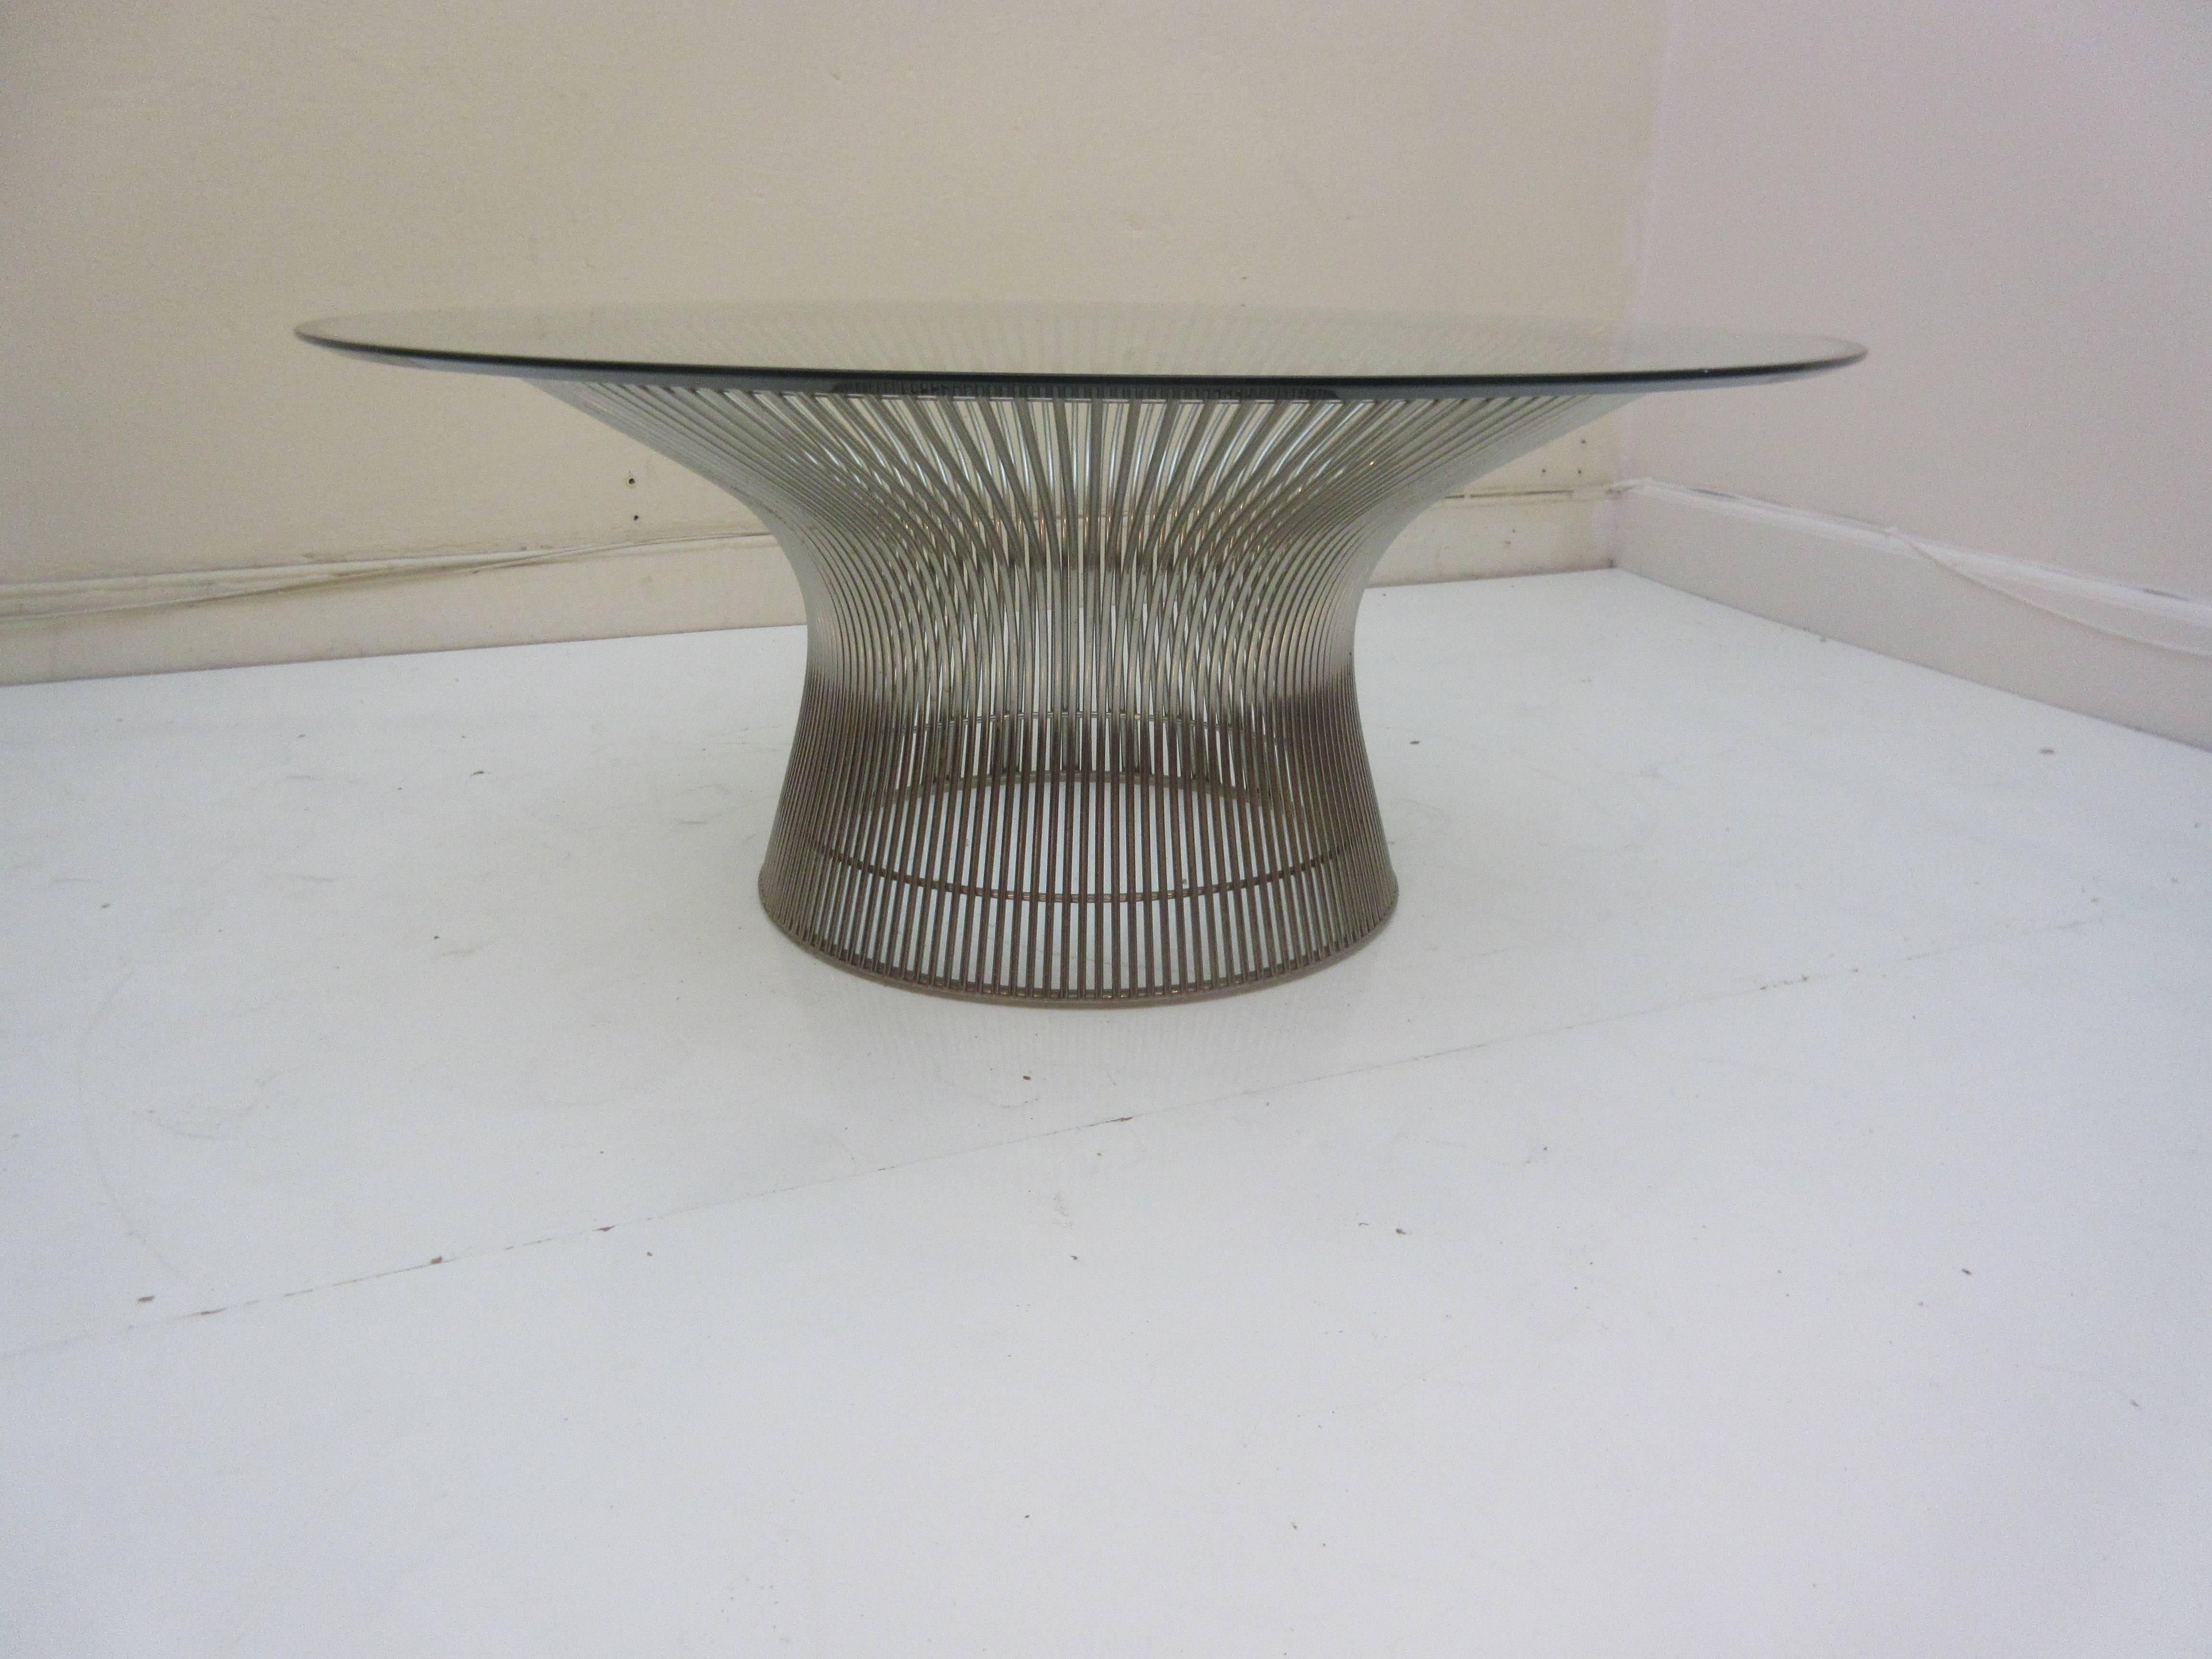 Warren Platner for Knoll International coffee table in the highly polished nickel finish. The glass beveled top is 36 inches in diameter and the base still has it's original plastic ring glide to protect your floor. Metal  in extraordinary